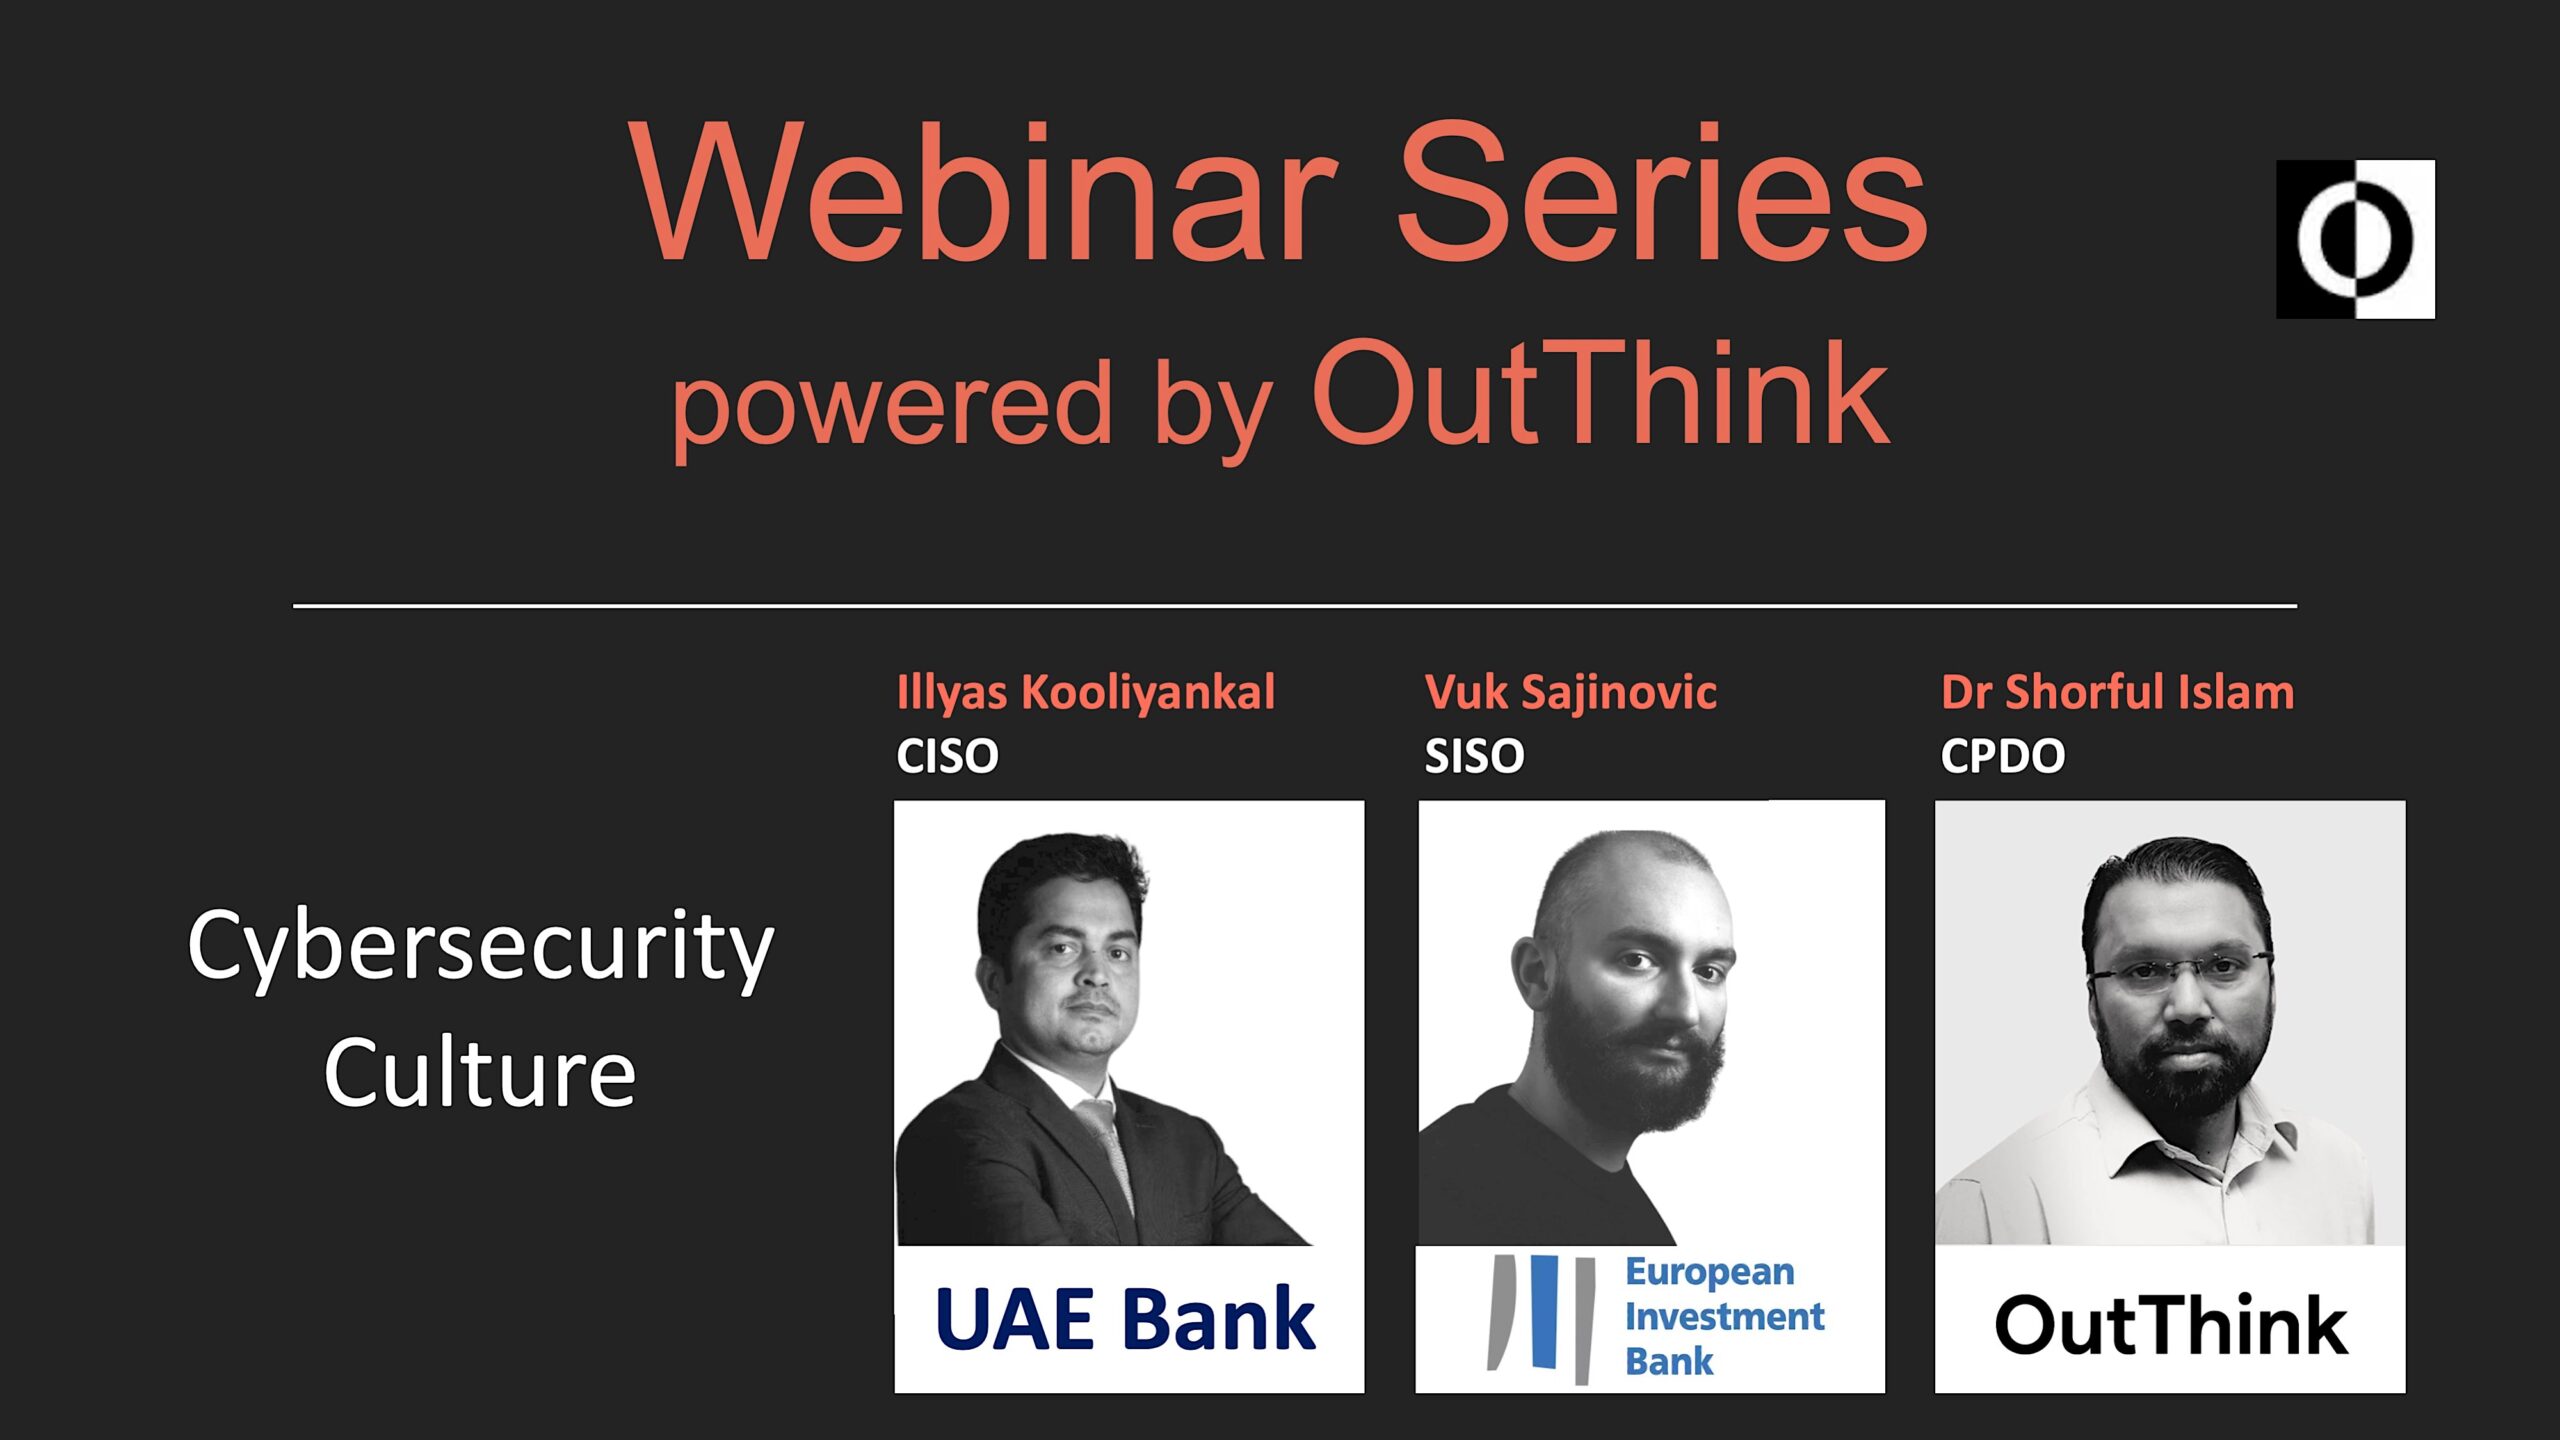 OutThink Webinar | Cybersecurity Culture | Illyas Kooliyankal, Chief Information Security Officer, UAE Bank and Vuk Sajinovi, Senior ISO, European Investment Bank